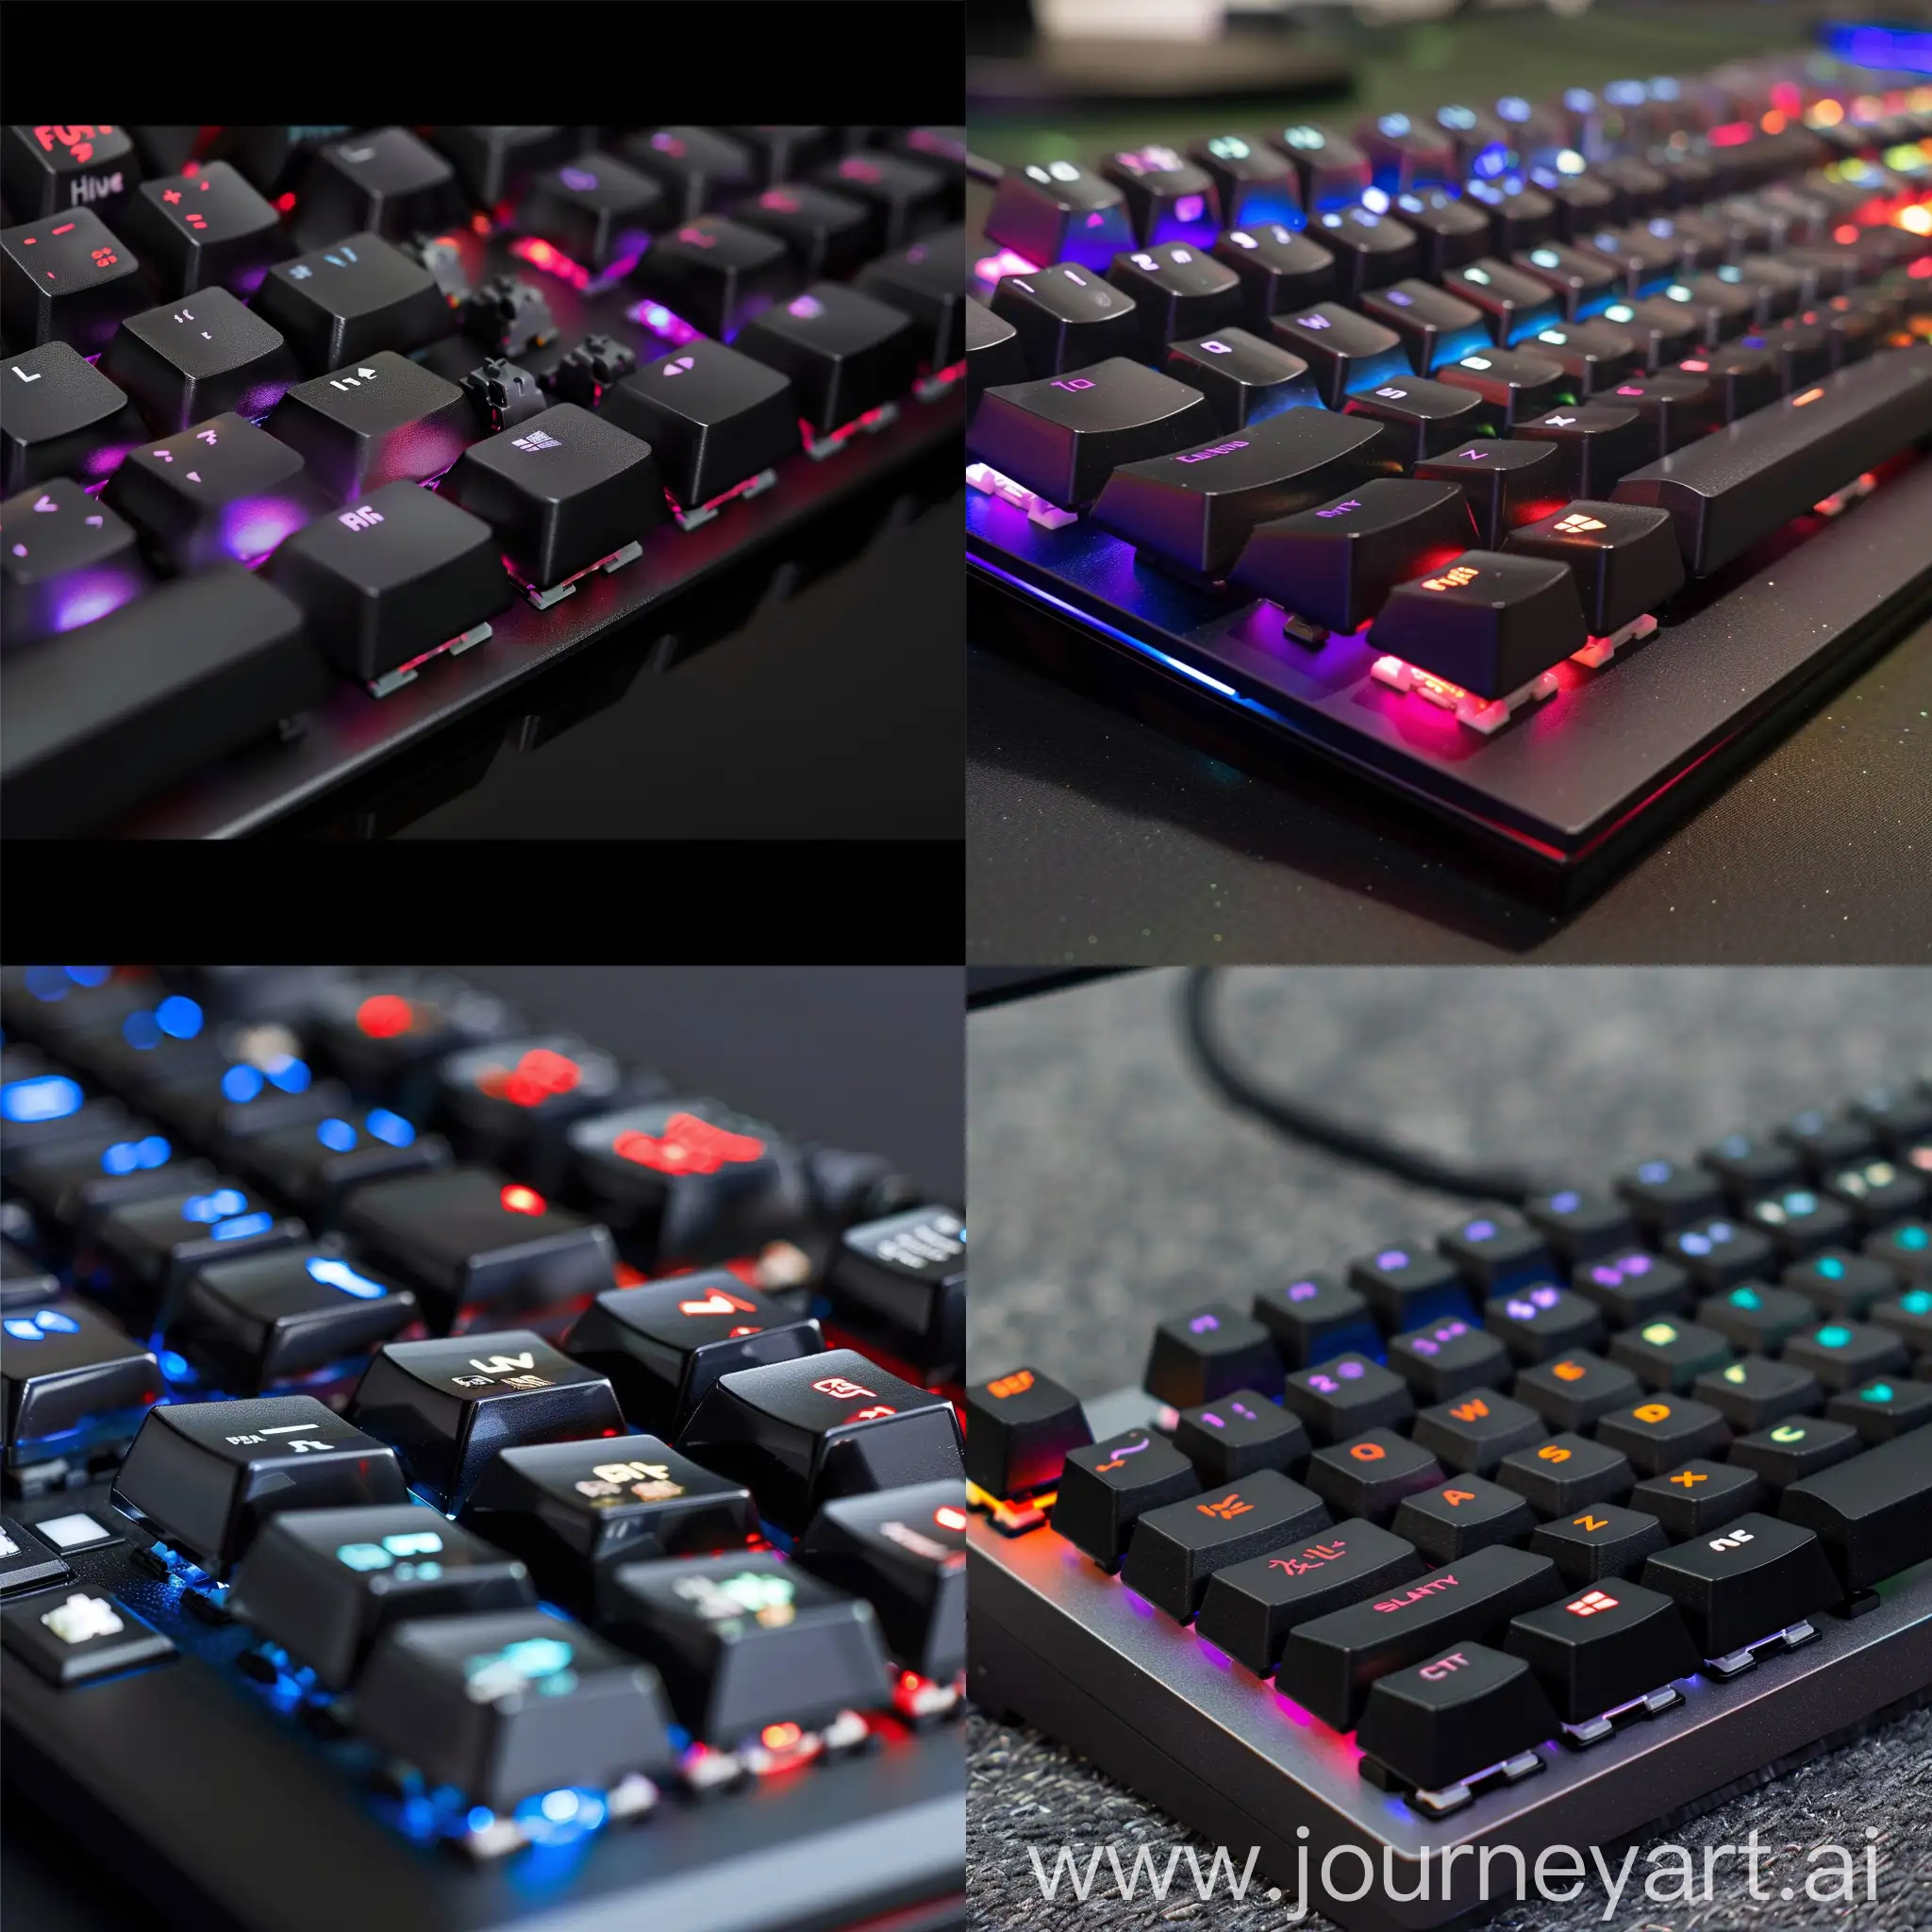 Hybrid-Gaming-Keyboard-with-Membrane-Switches-Precision-and-Comfort